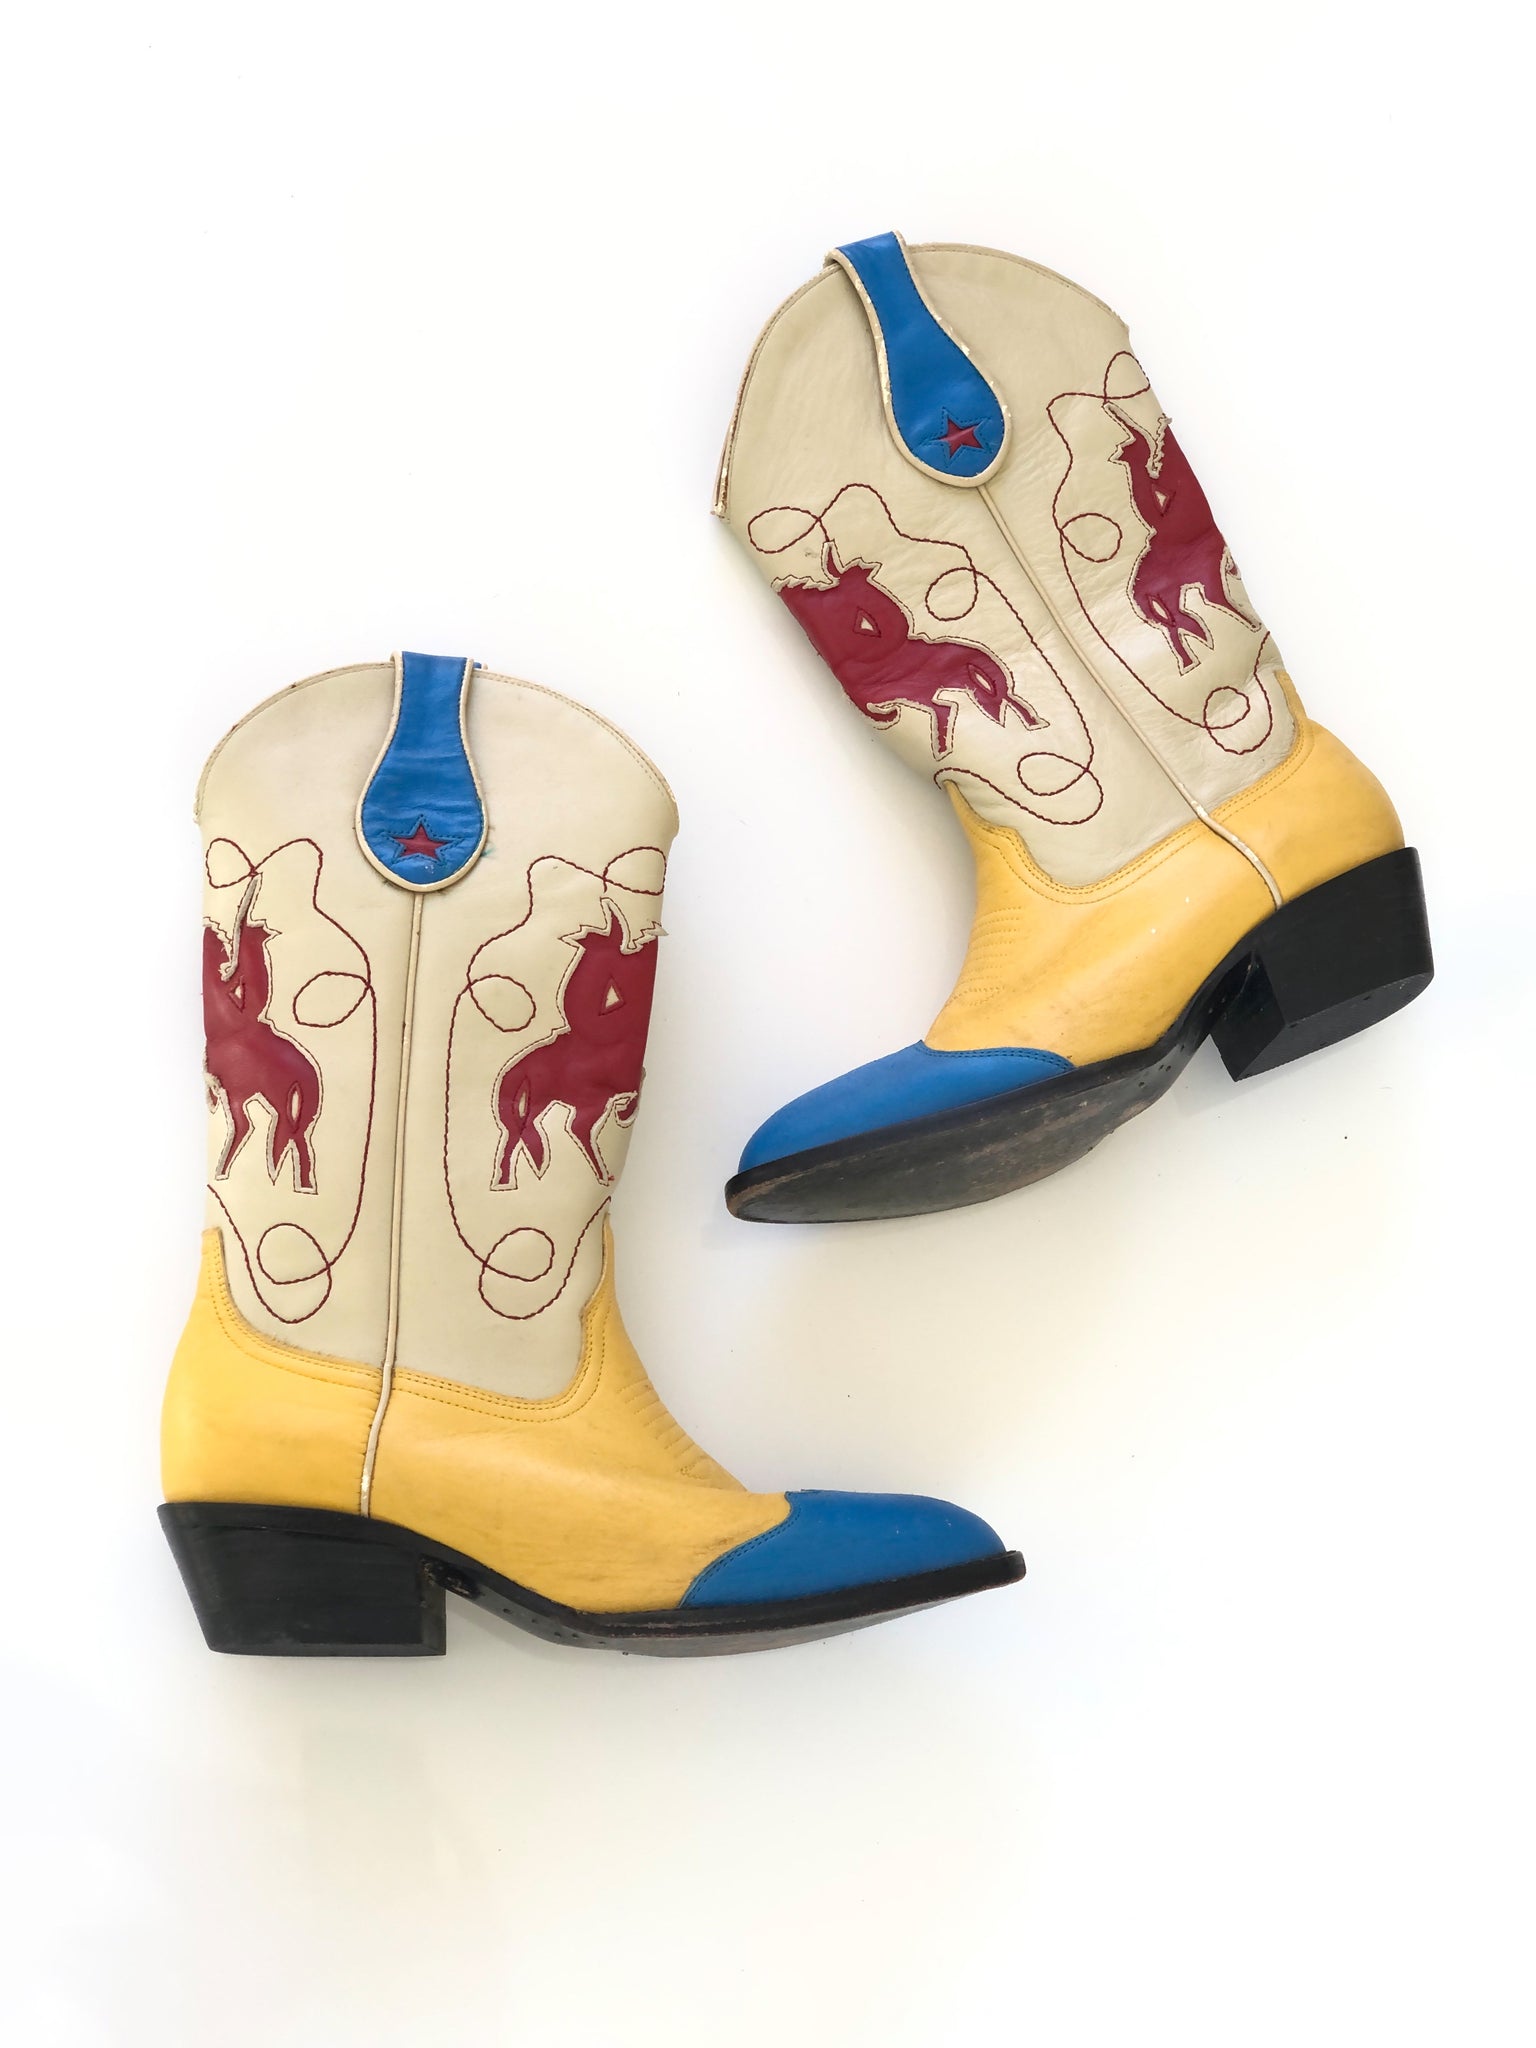 VINTAGE: Multi-Colored Rodeo Cowboy Boots